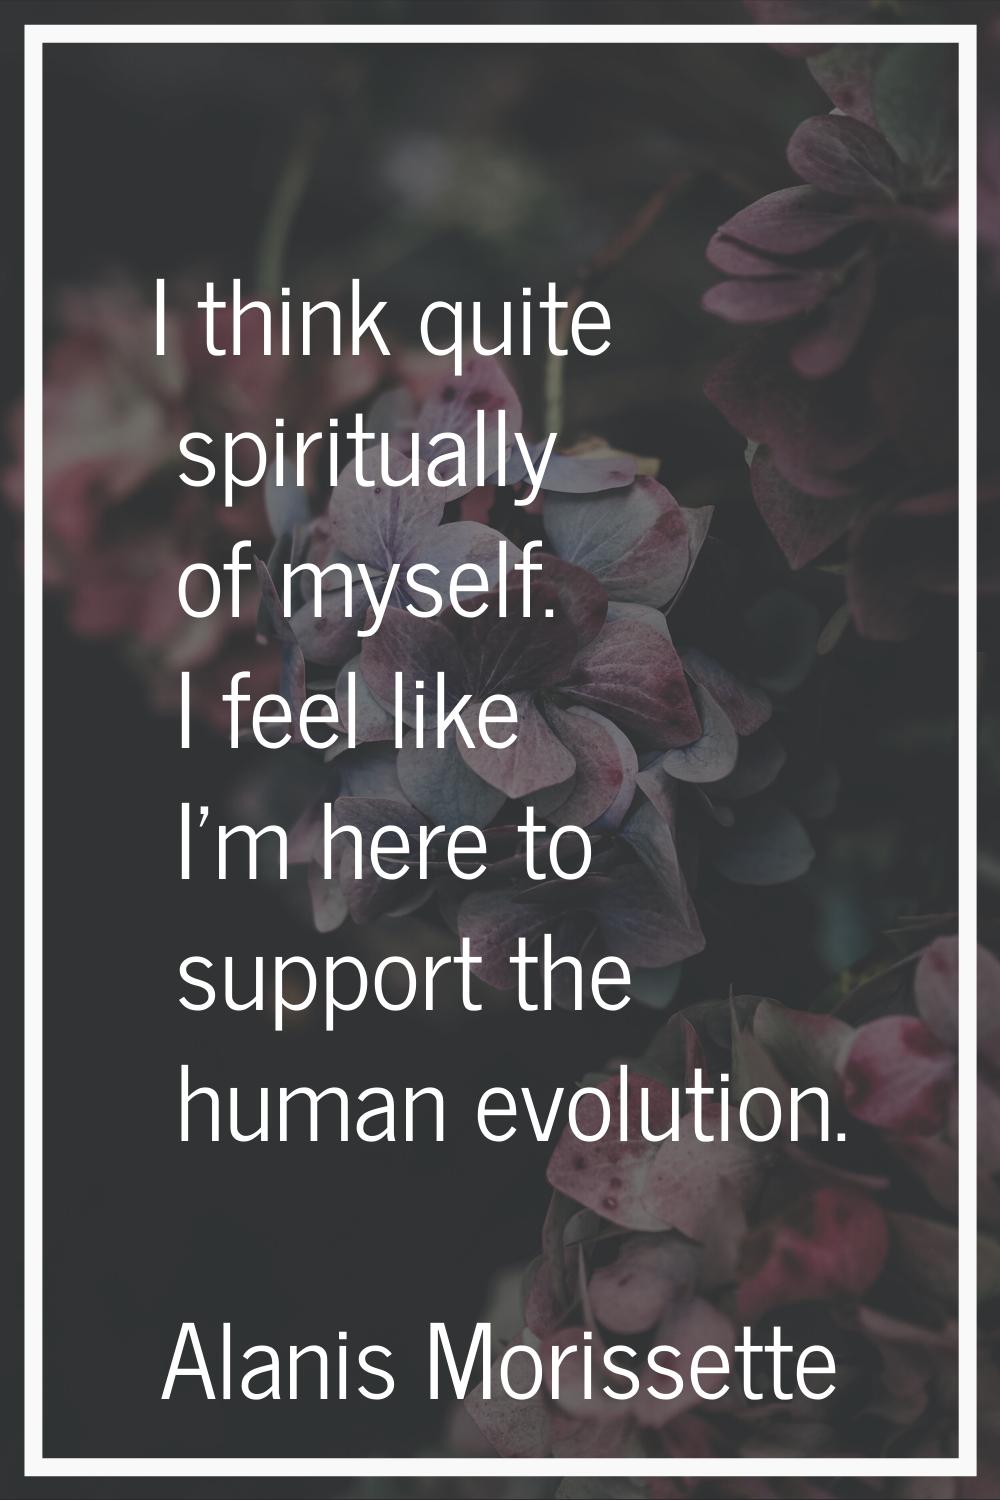 I think quite spiritually of myself. I feel like I'm here to support the human evolution.